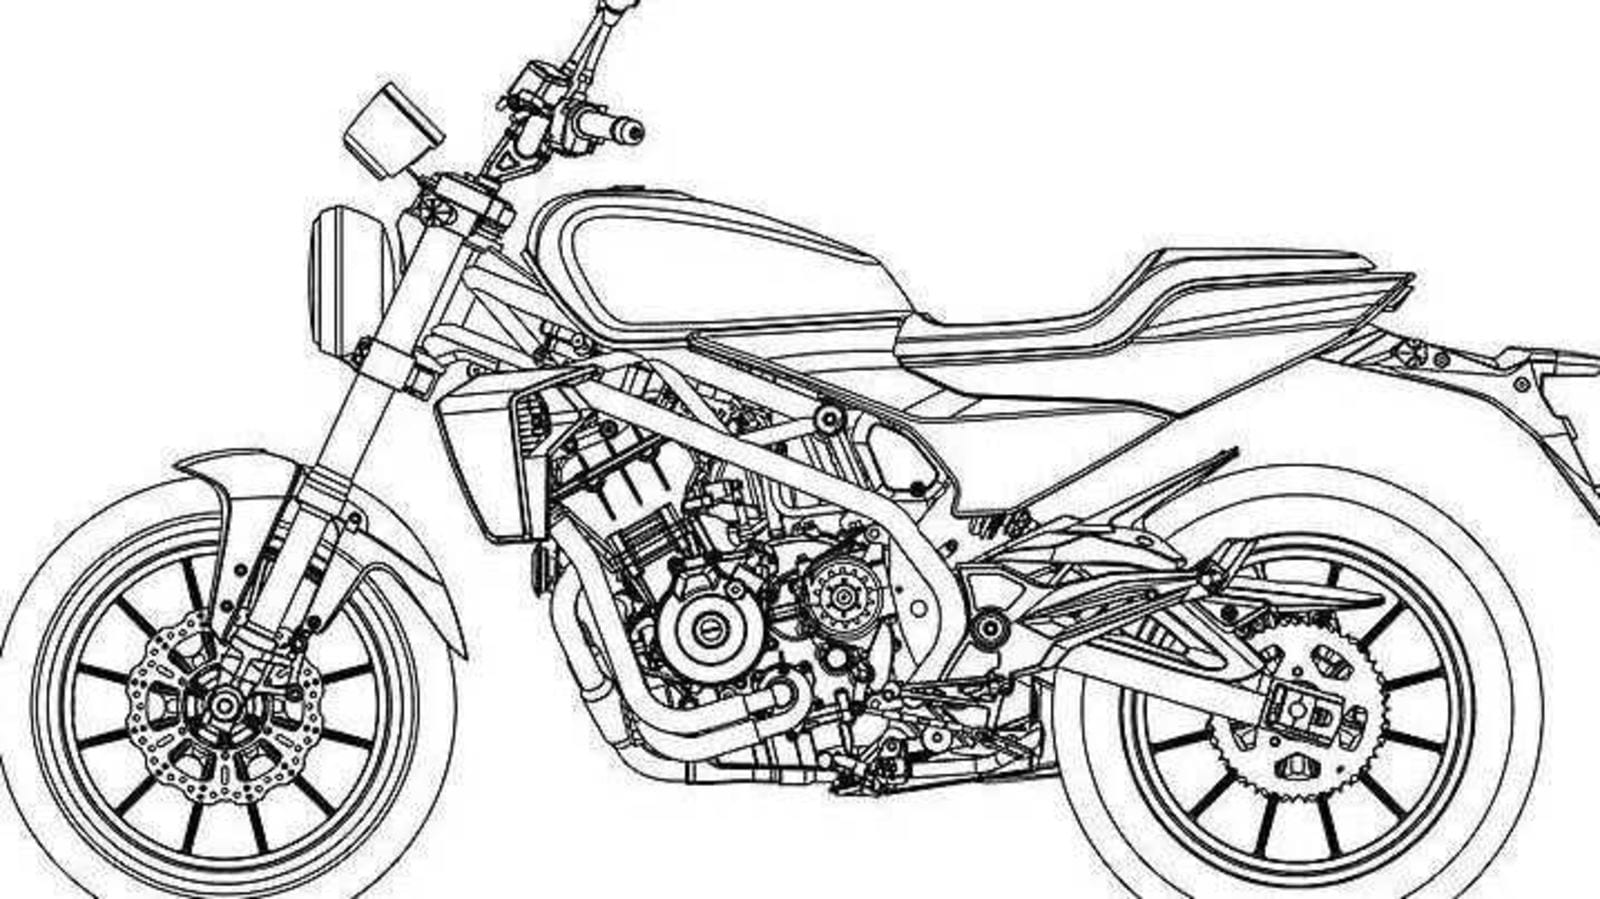 Motorcyclist on motorcycle drawing Motorcyclist on harley davidson  motorcycle  black and white drawing illustration  CanStock